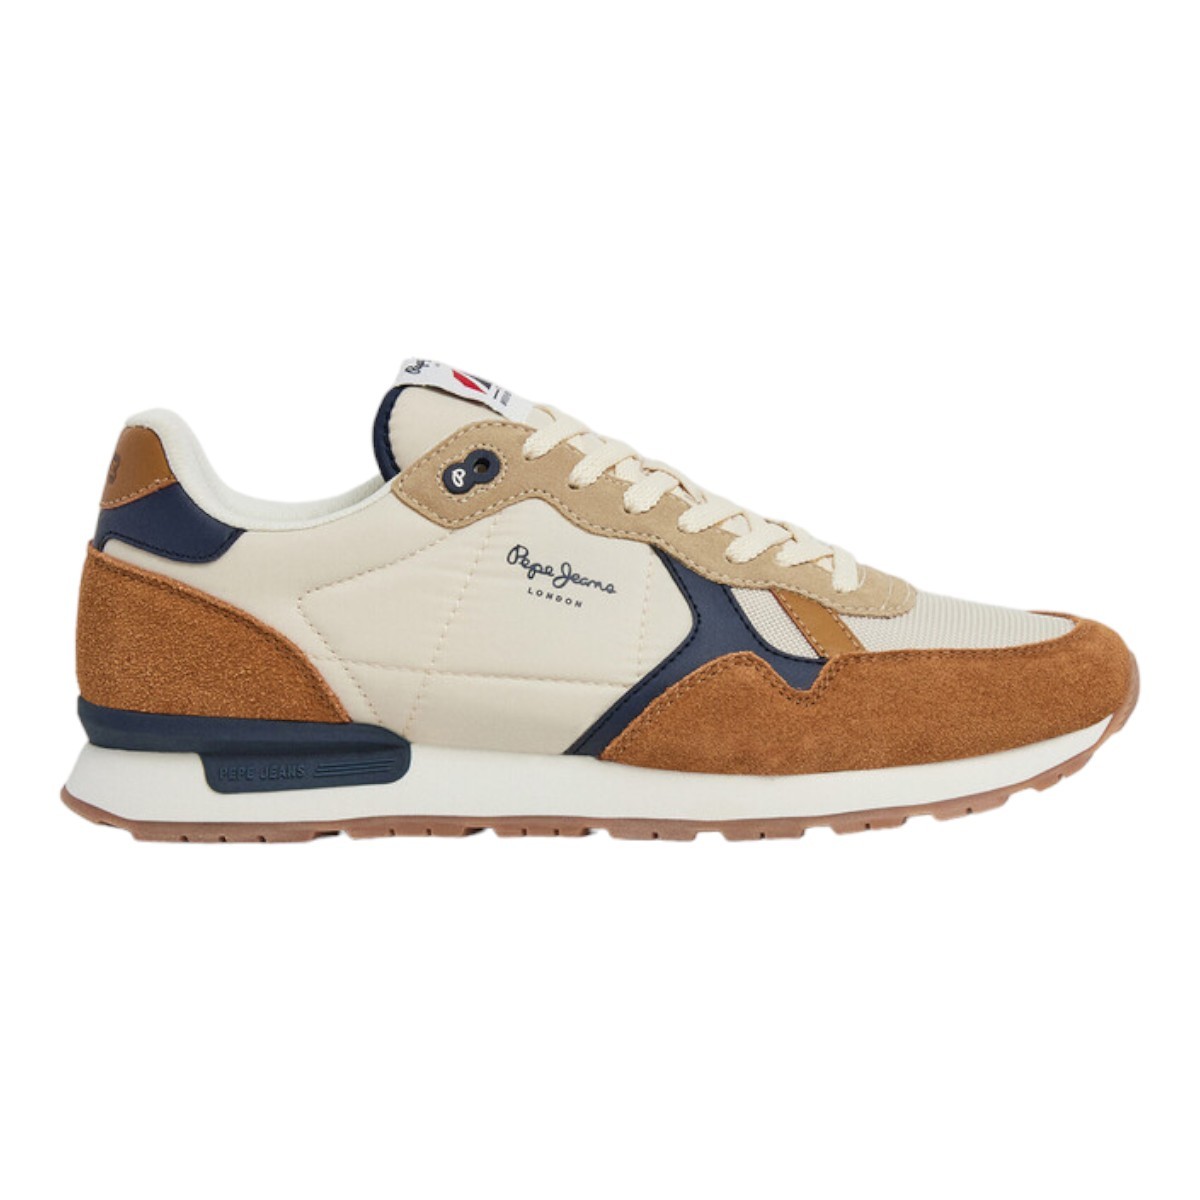 Pepe jeans BRIT MIX M Sneakers Ανδρικά Παπούτσια PMS40006-859 Ταμπά